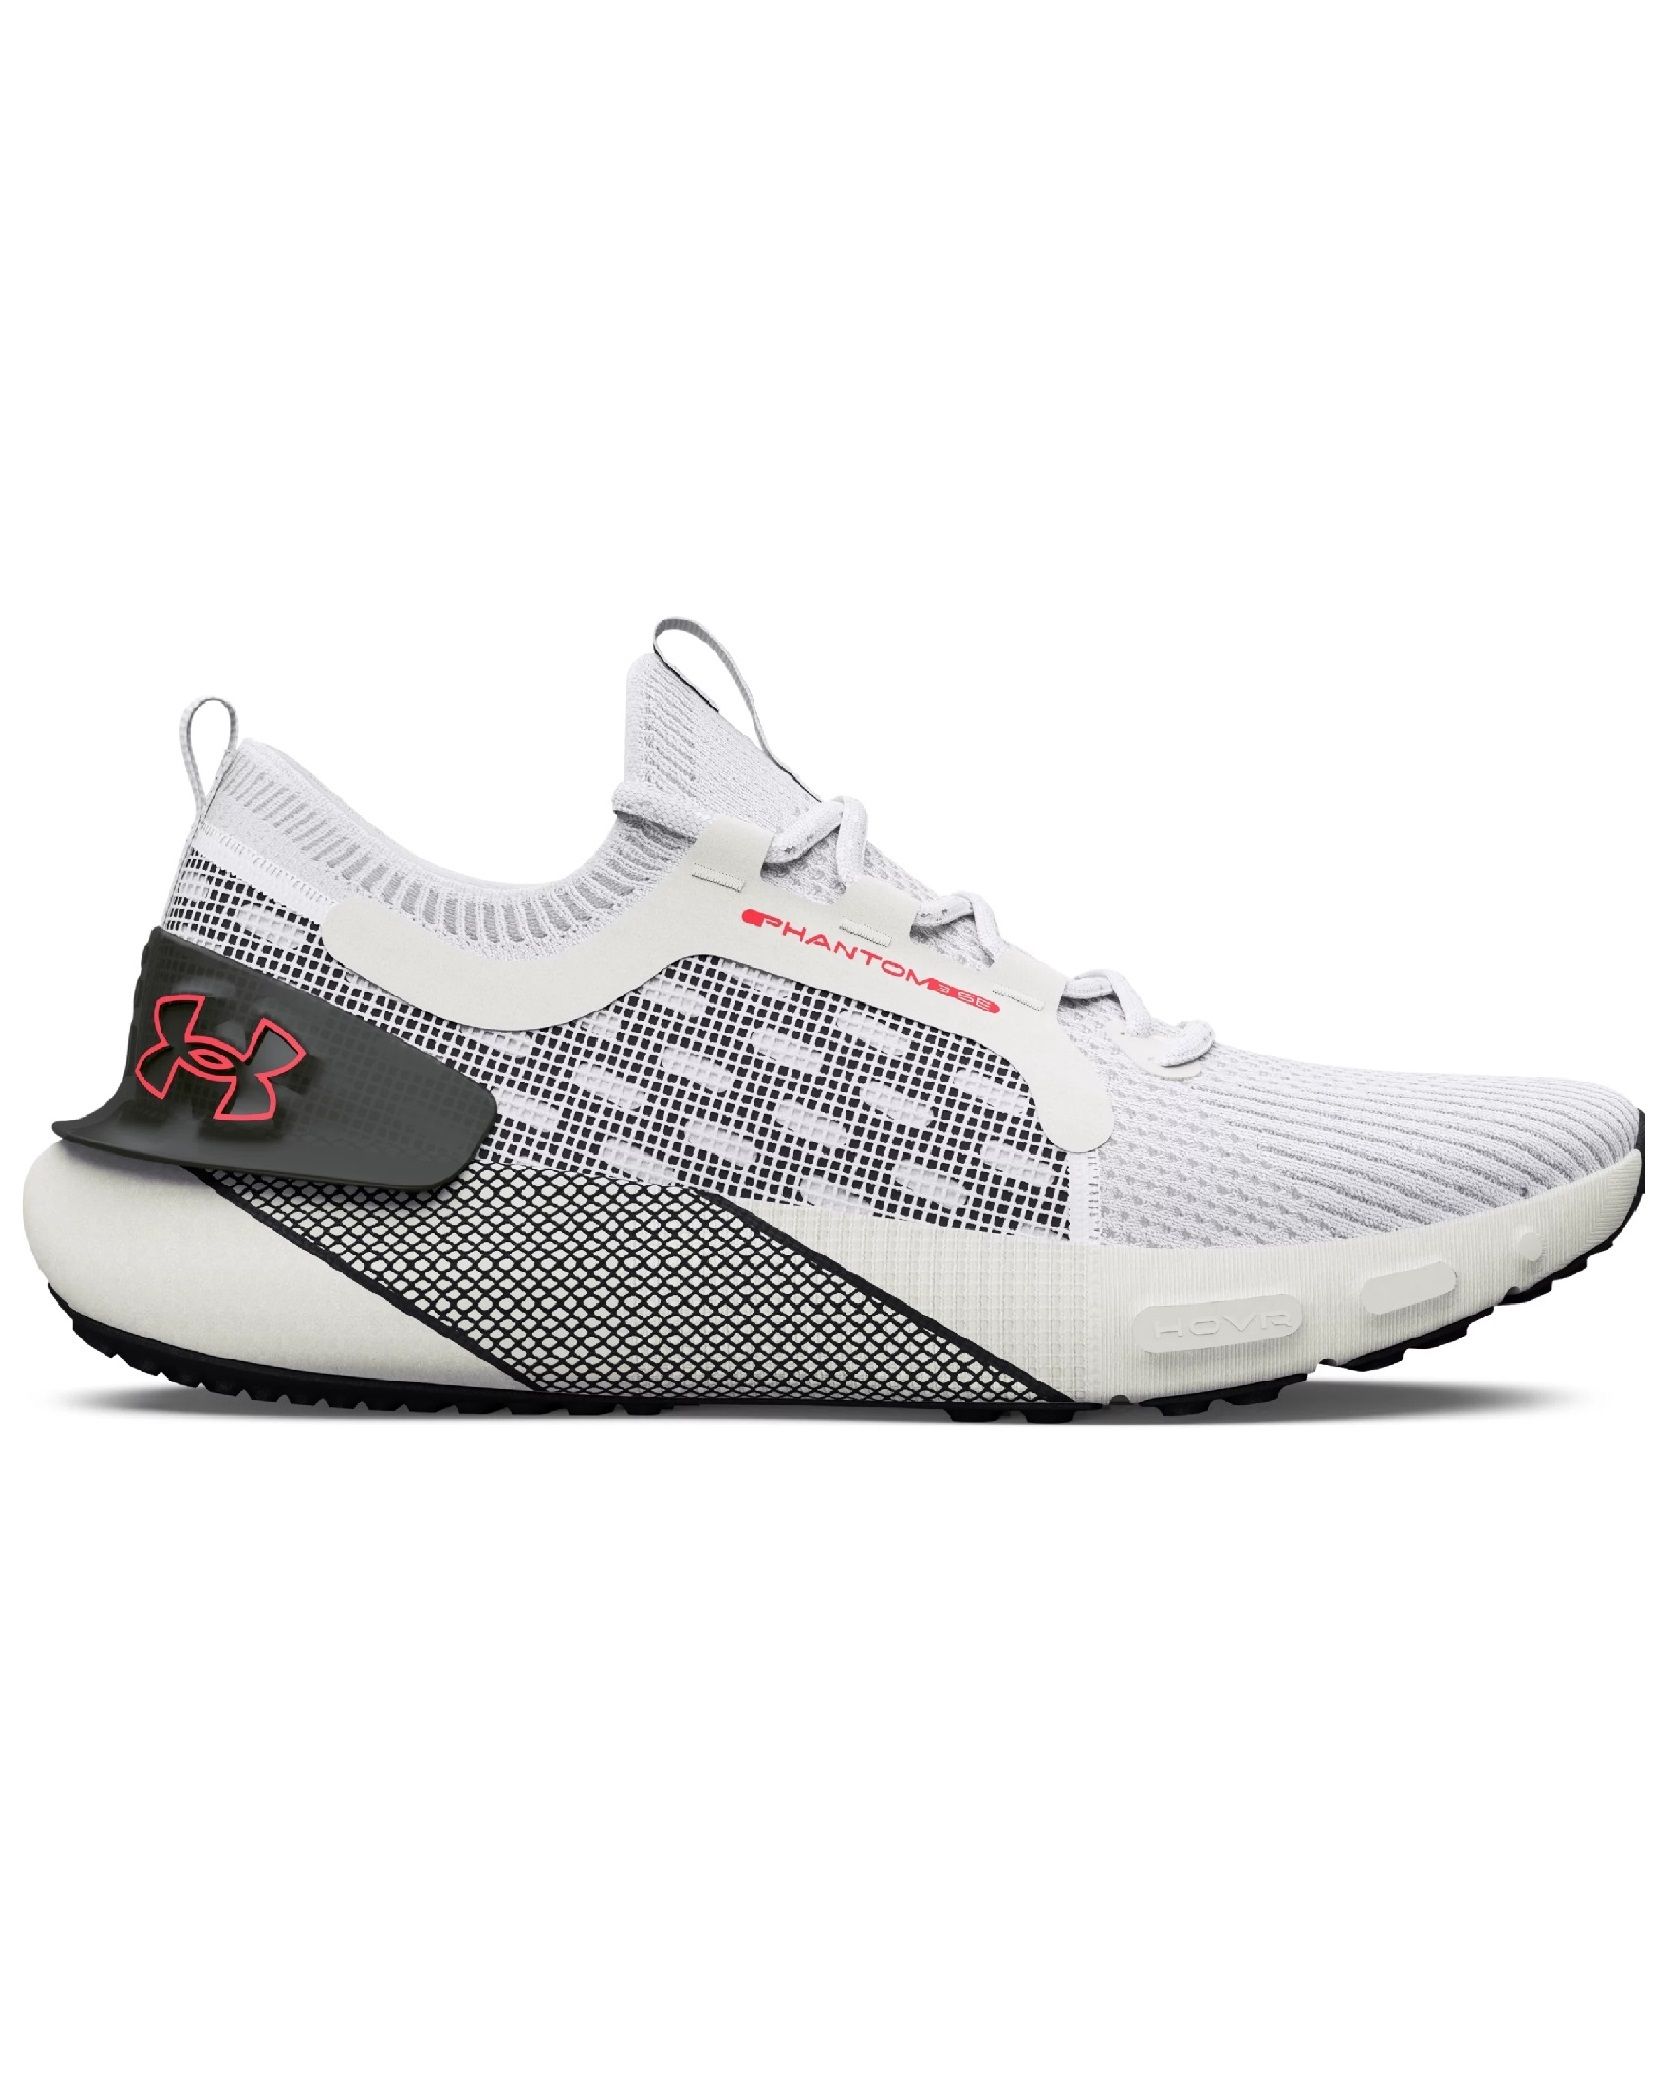 Under Armour Curry Flow Cozy 'Ivory Zeppelin Yellow' 3023815‑108 -  3023815-108 - Novelship